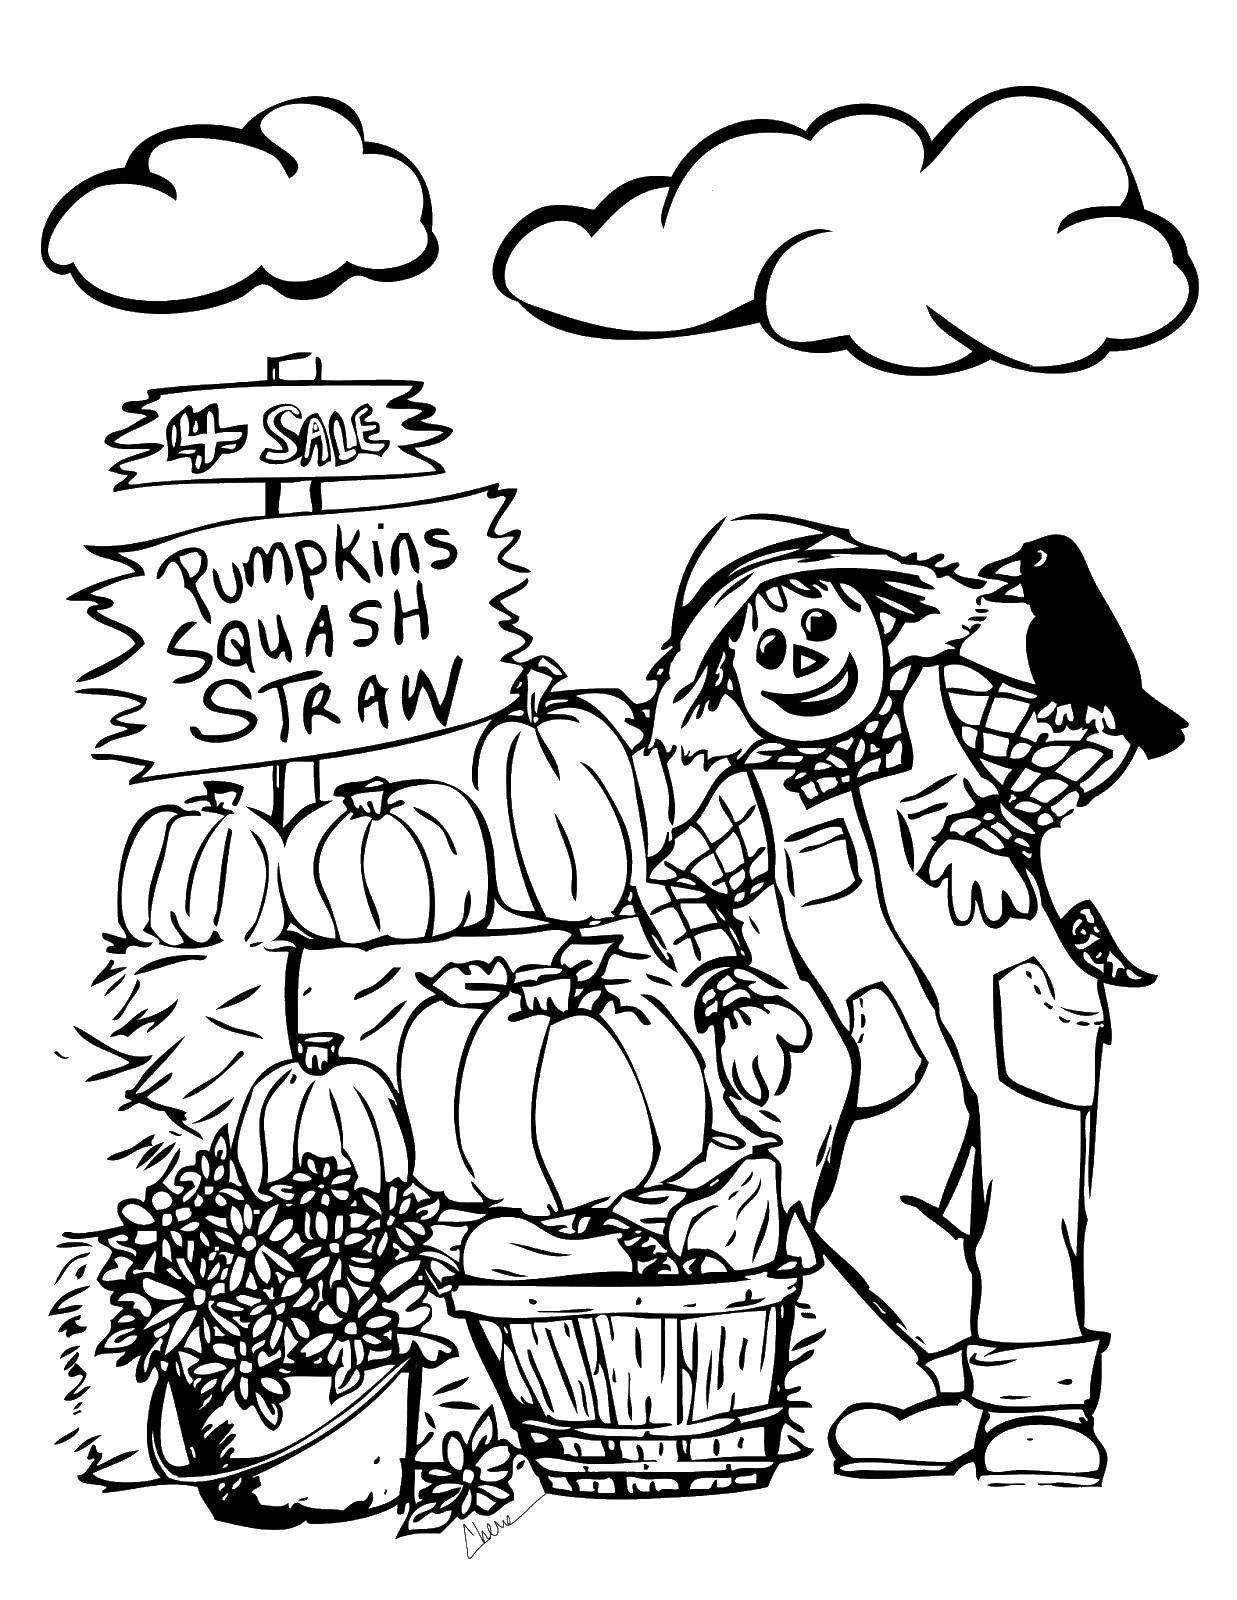 Coloring Scarecrow sells pumpkins. Category Autumn. Tags:  Autumn, leaves, pumpkin.